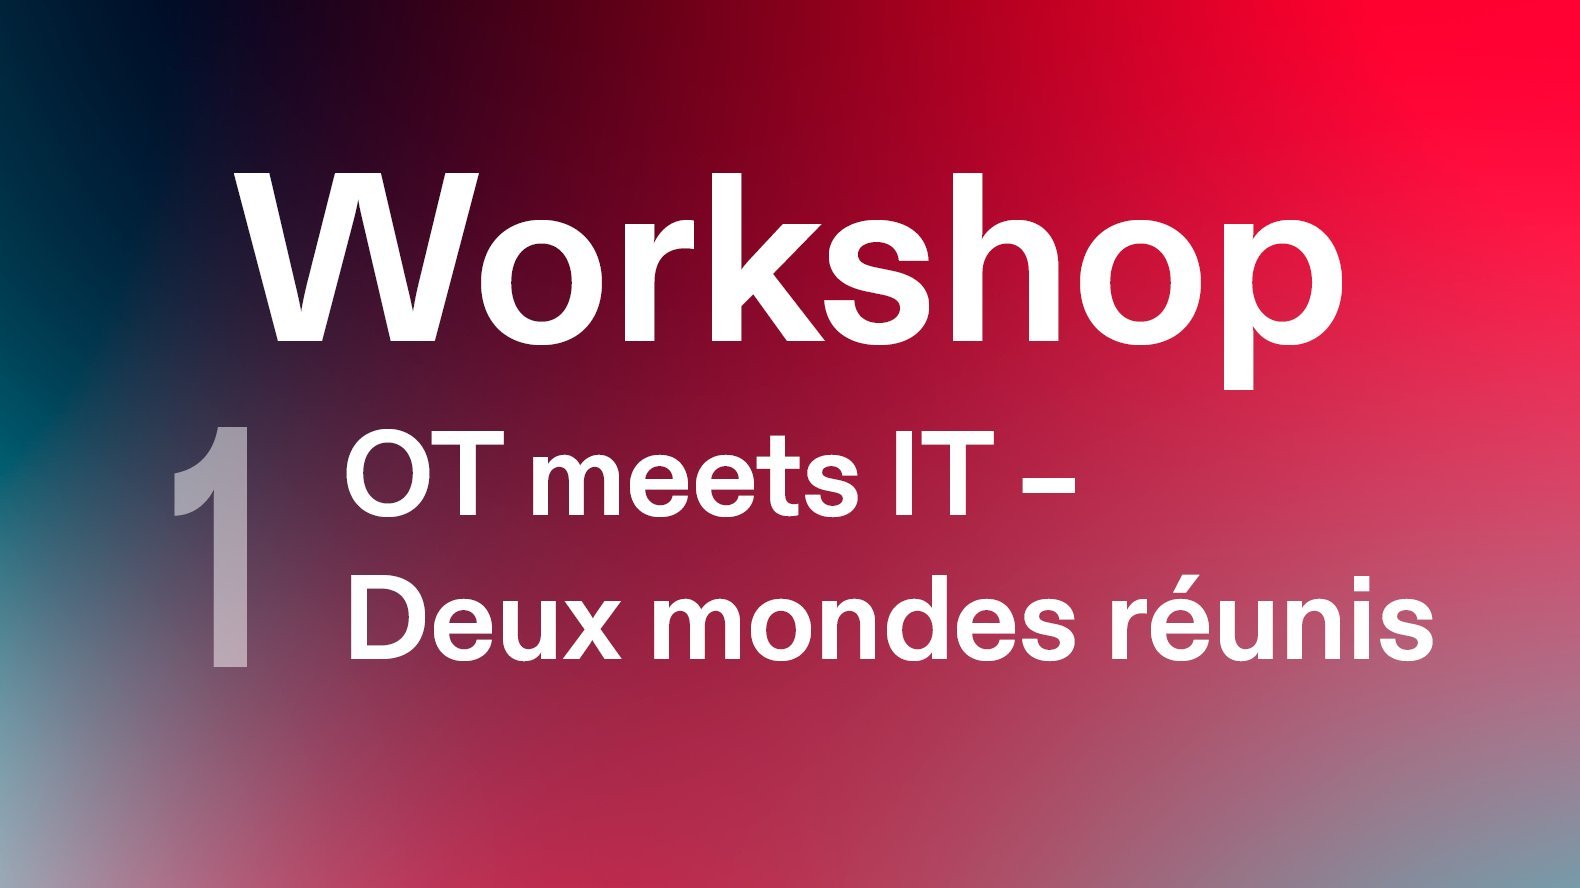 Banner of the IIoT Workshop OT meets IT on colorful background in English.